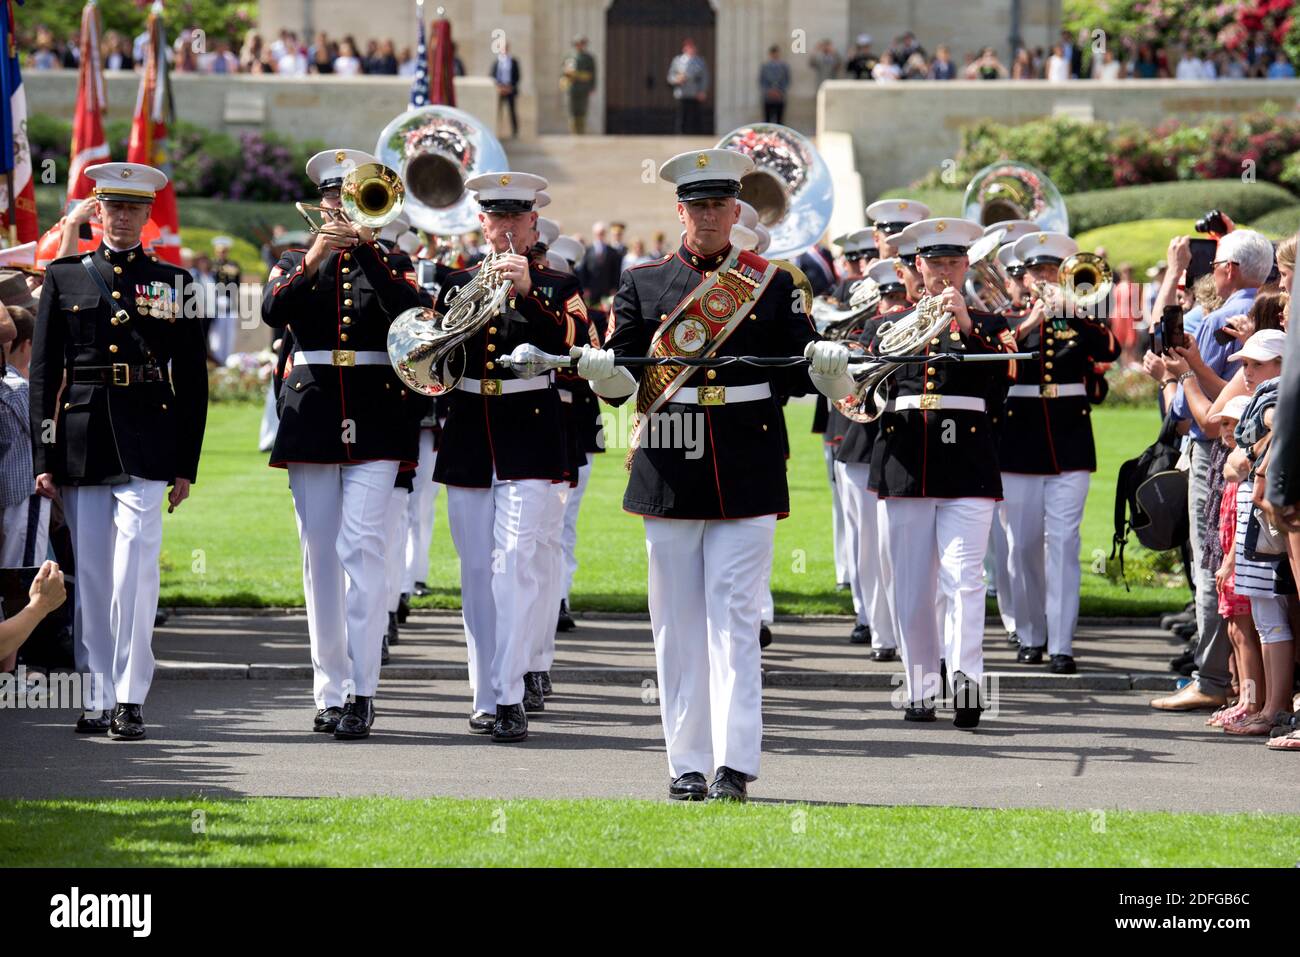 Hand out file photo dated May 27, 2018 of Marines with the 2nd Marine Division Band march off after the ceremony of The Battle of Belleau Wood Centennial at the Aisne-Marne American Cemetery, France. The Ceremony commemorated the sacrifices made during WWI. President Trump reportedly skipped his scheduled visit to the Aisne-Marne American Cemetery near Paris in 2018 after dismissing the U.S. soldiers who died during the Battle of Belleau Wood as “losers.” According to a report in The Atlantic published Thursday, Trump’s excuses of “the helicopter couldn’t fly” and that the Secret Service would Stock Photo